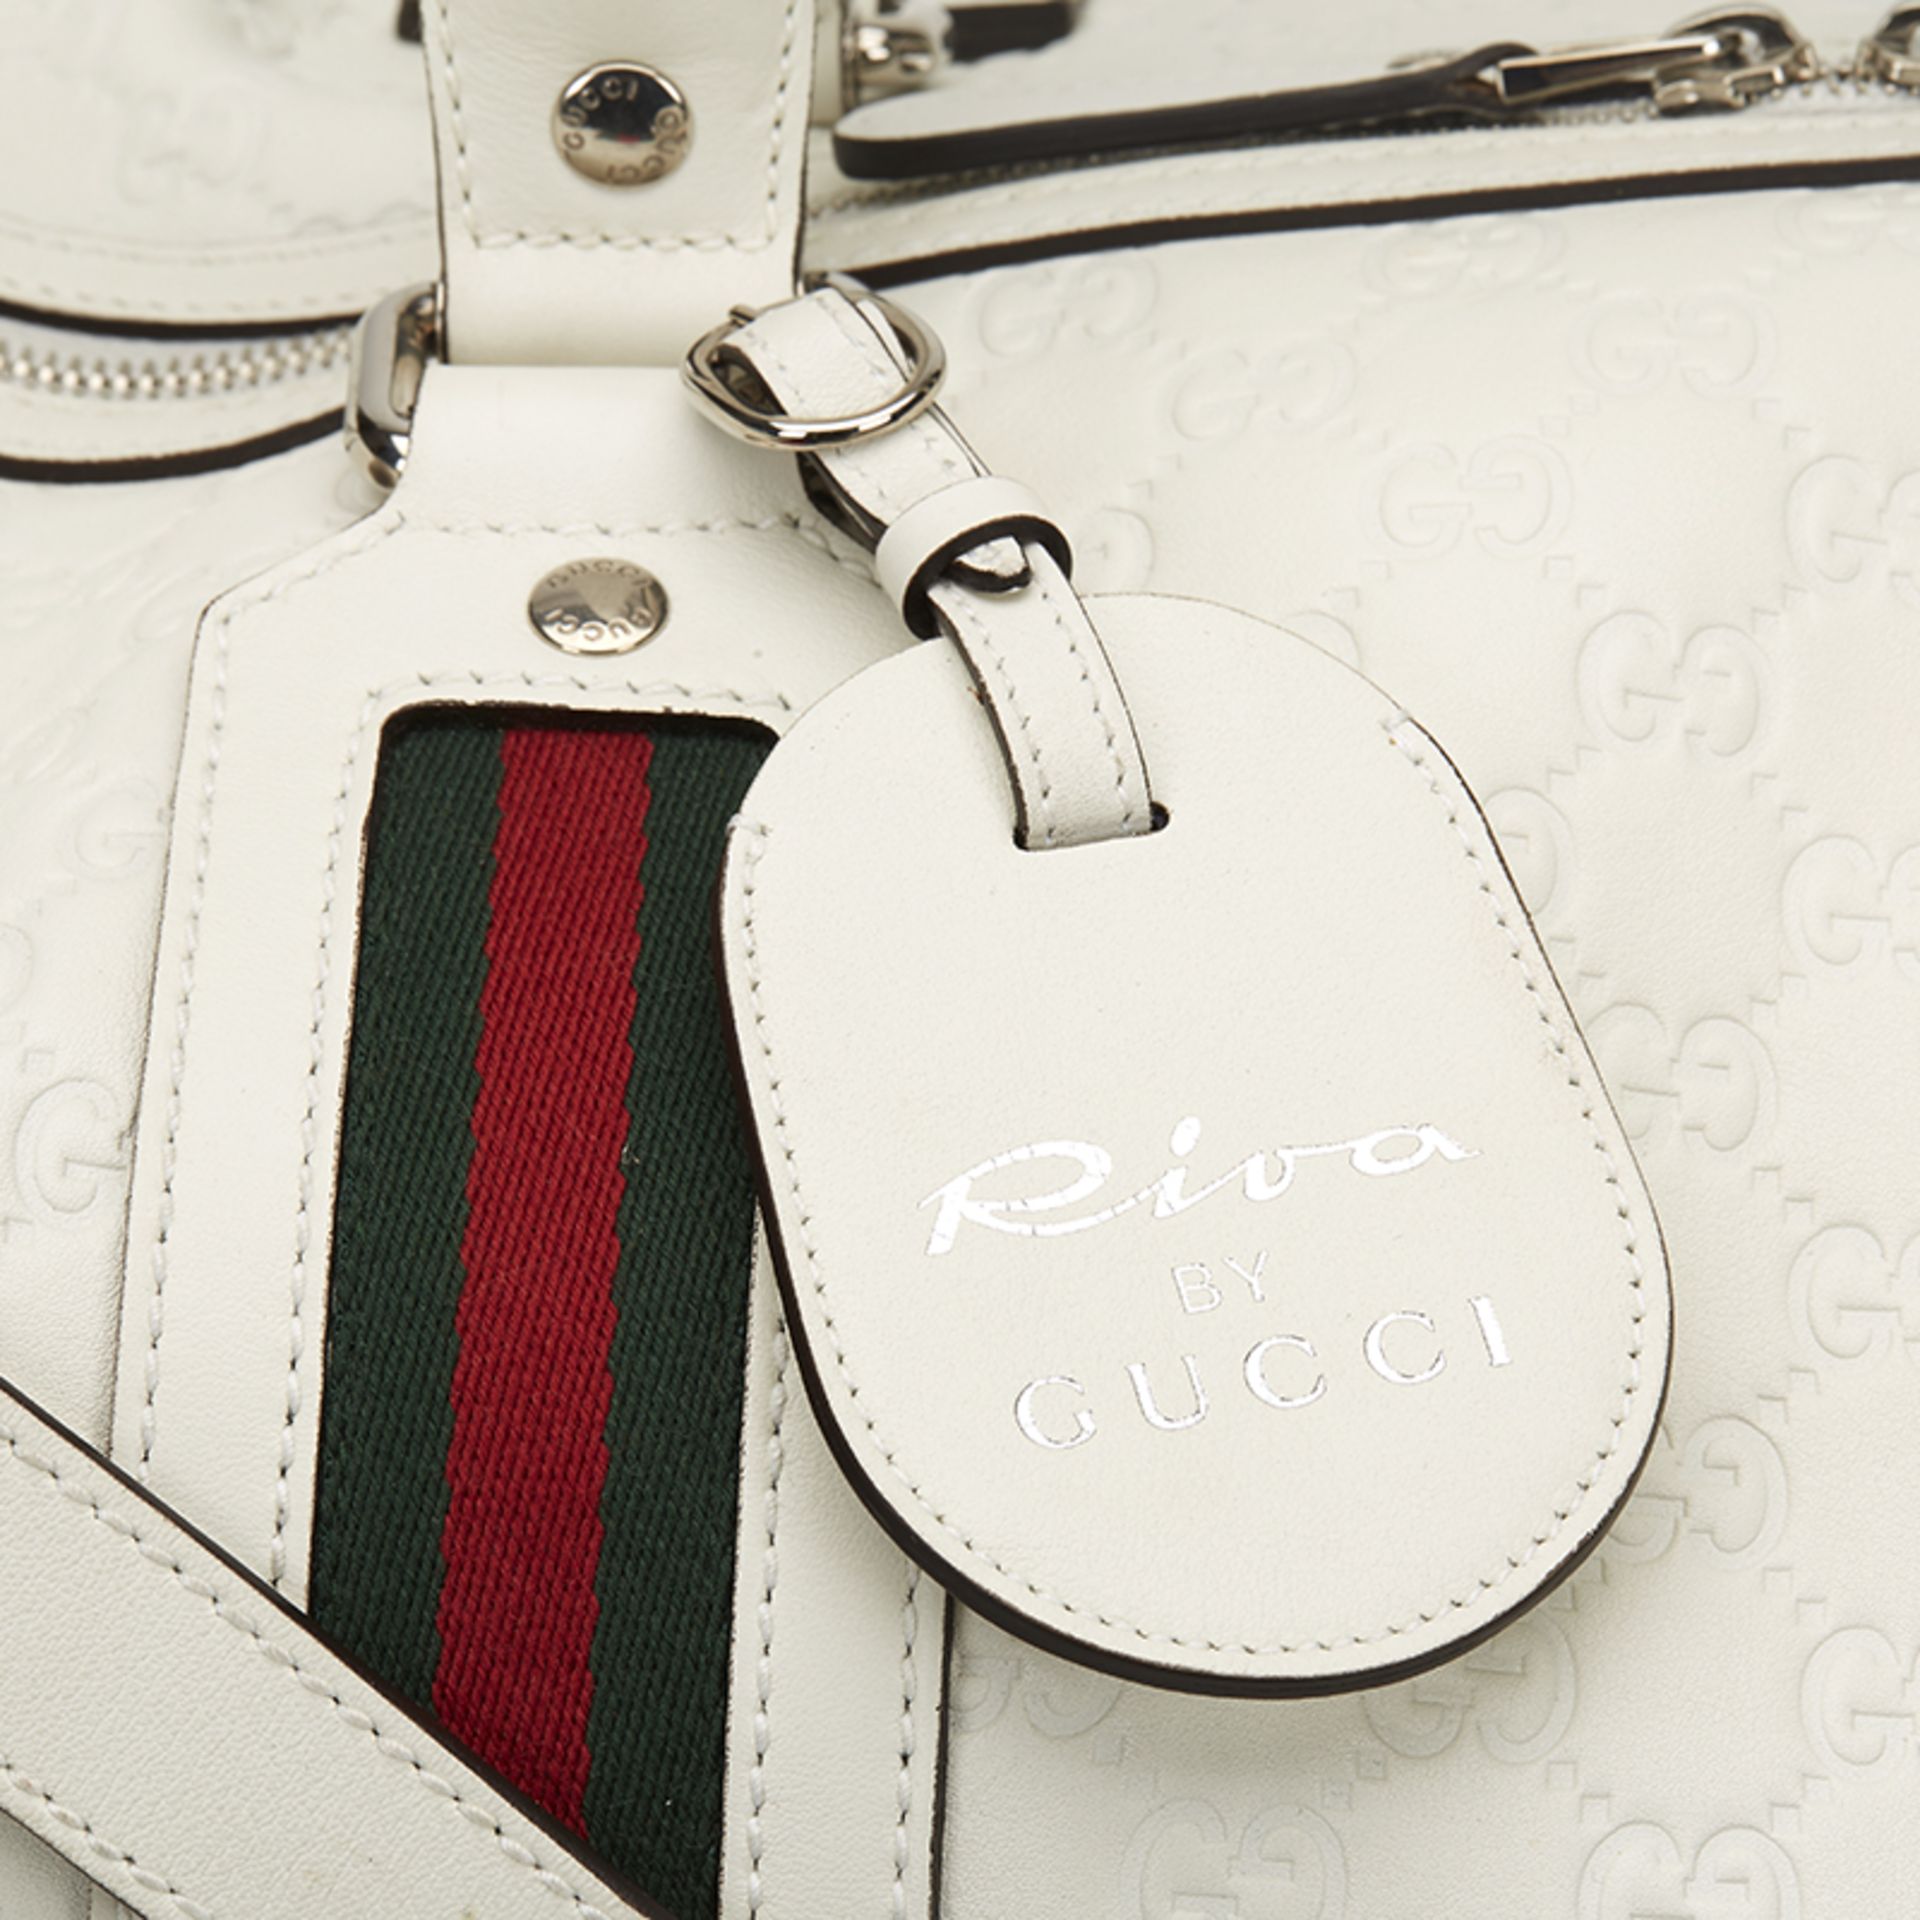 Gucci, Holdall - Image 6 of 8